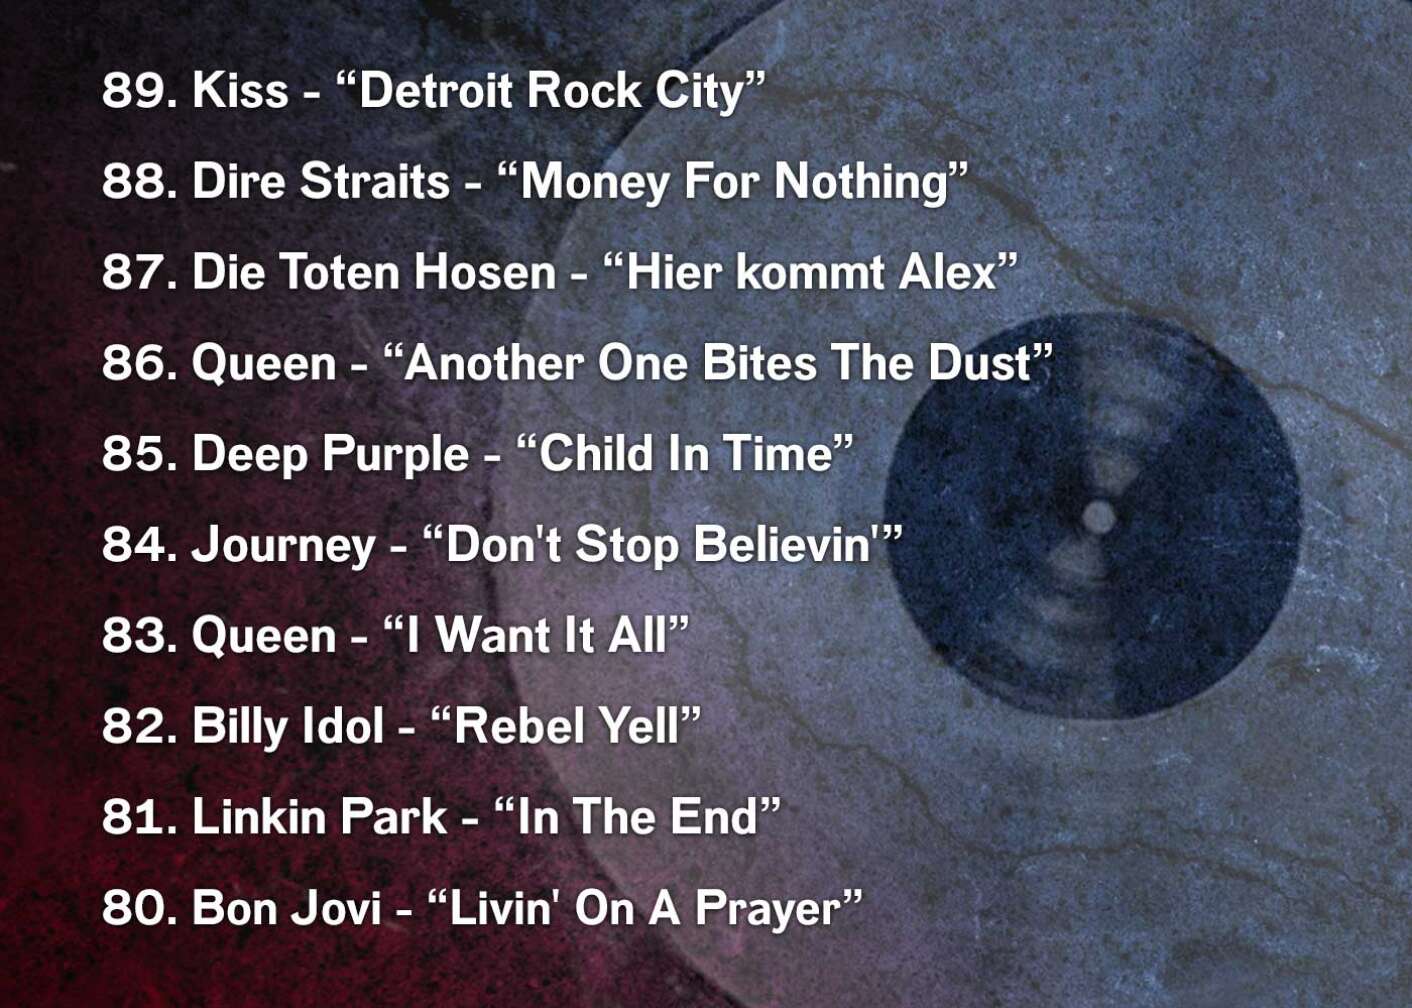 89. Kiss - “Detroit Rock City” 88. Dire Straits - “Money For Nothing” 87. Die Toten Hosen - “Hier kommt Alex” 86. Queen - “Another One Bites The Dust” 85. Deep Purple - “Child In Time” 84. Journey - “Don't Stop Believin'” 83. Queen - “I Want It All” 82. Billy Idol - “Rebel Yell” 81. Linkin Park - “In The End” 80. Bon Jovi - “Livin' On A Prayer”